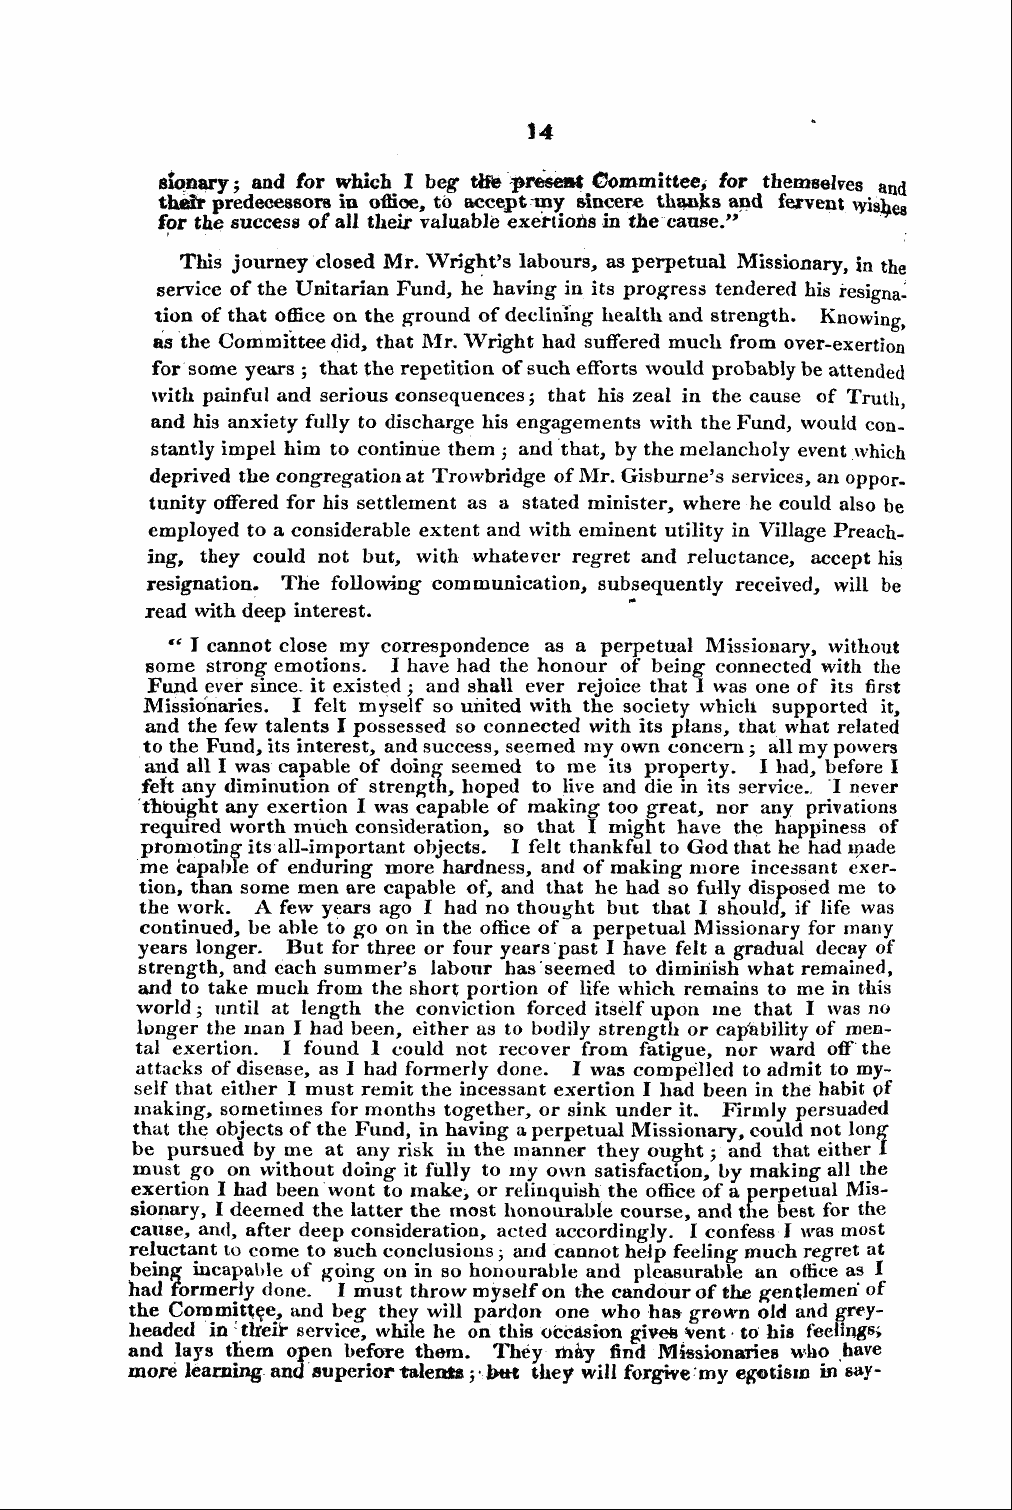 Monthly Repository (1806-1838) and Unitarian Chronicle (1832-1833): F Y, 1st edition, Supplement - 34